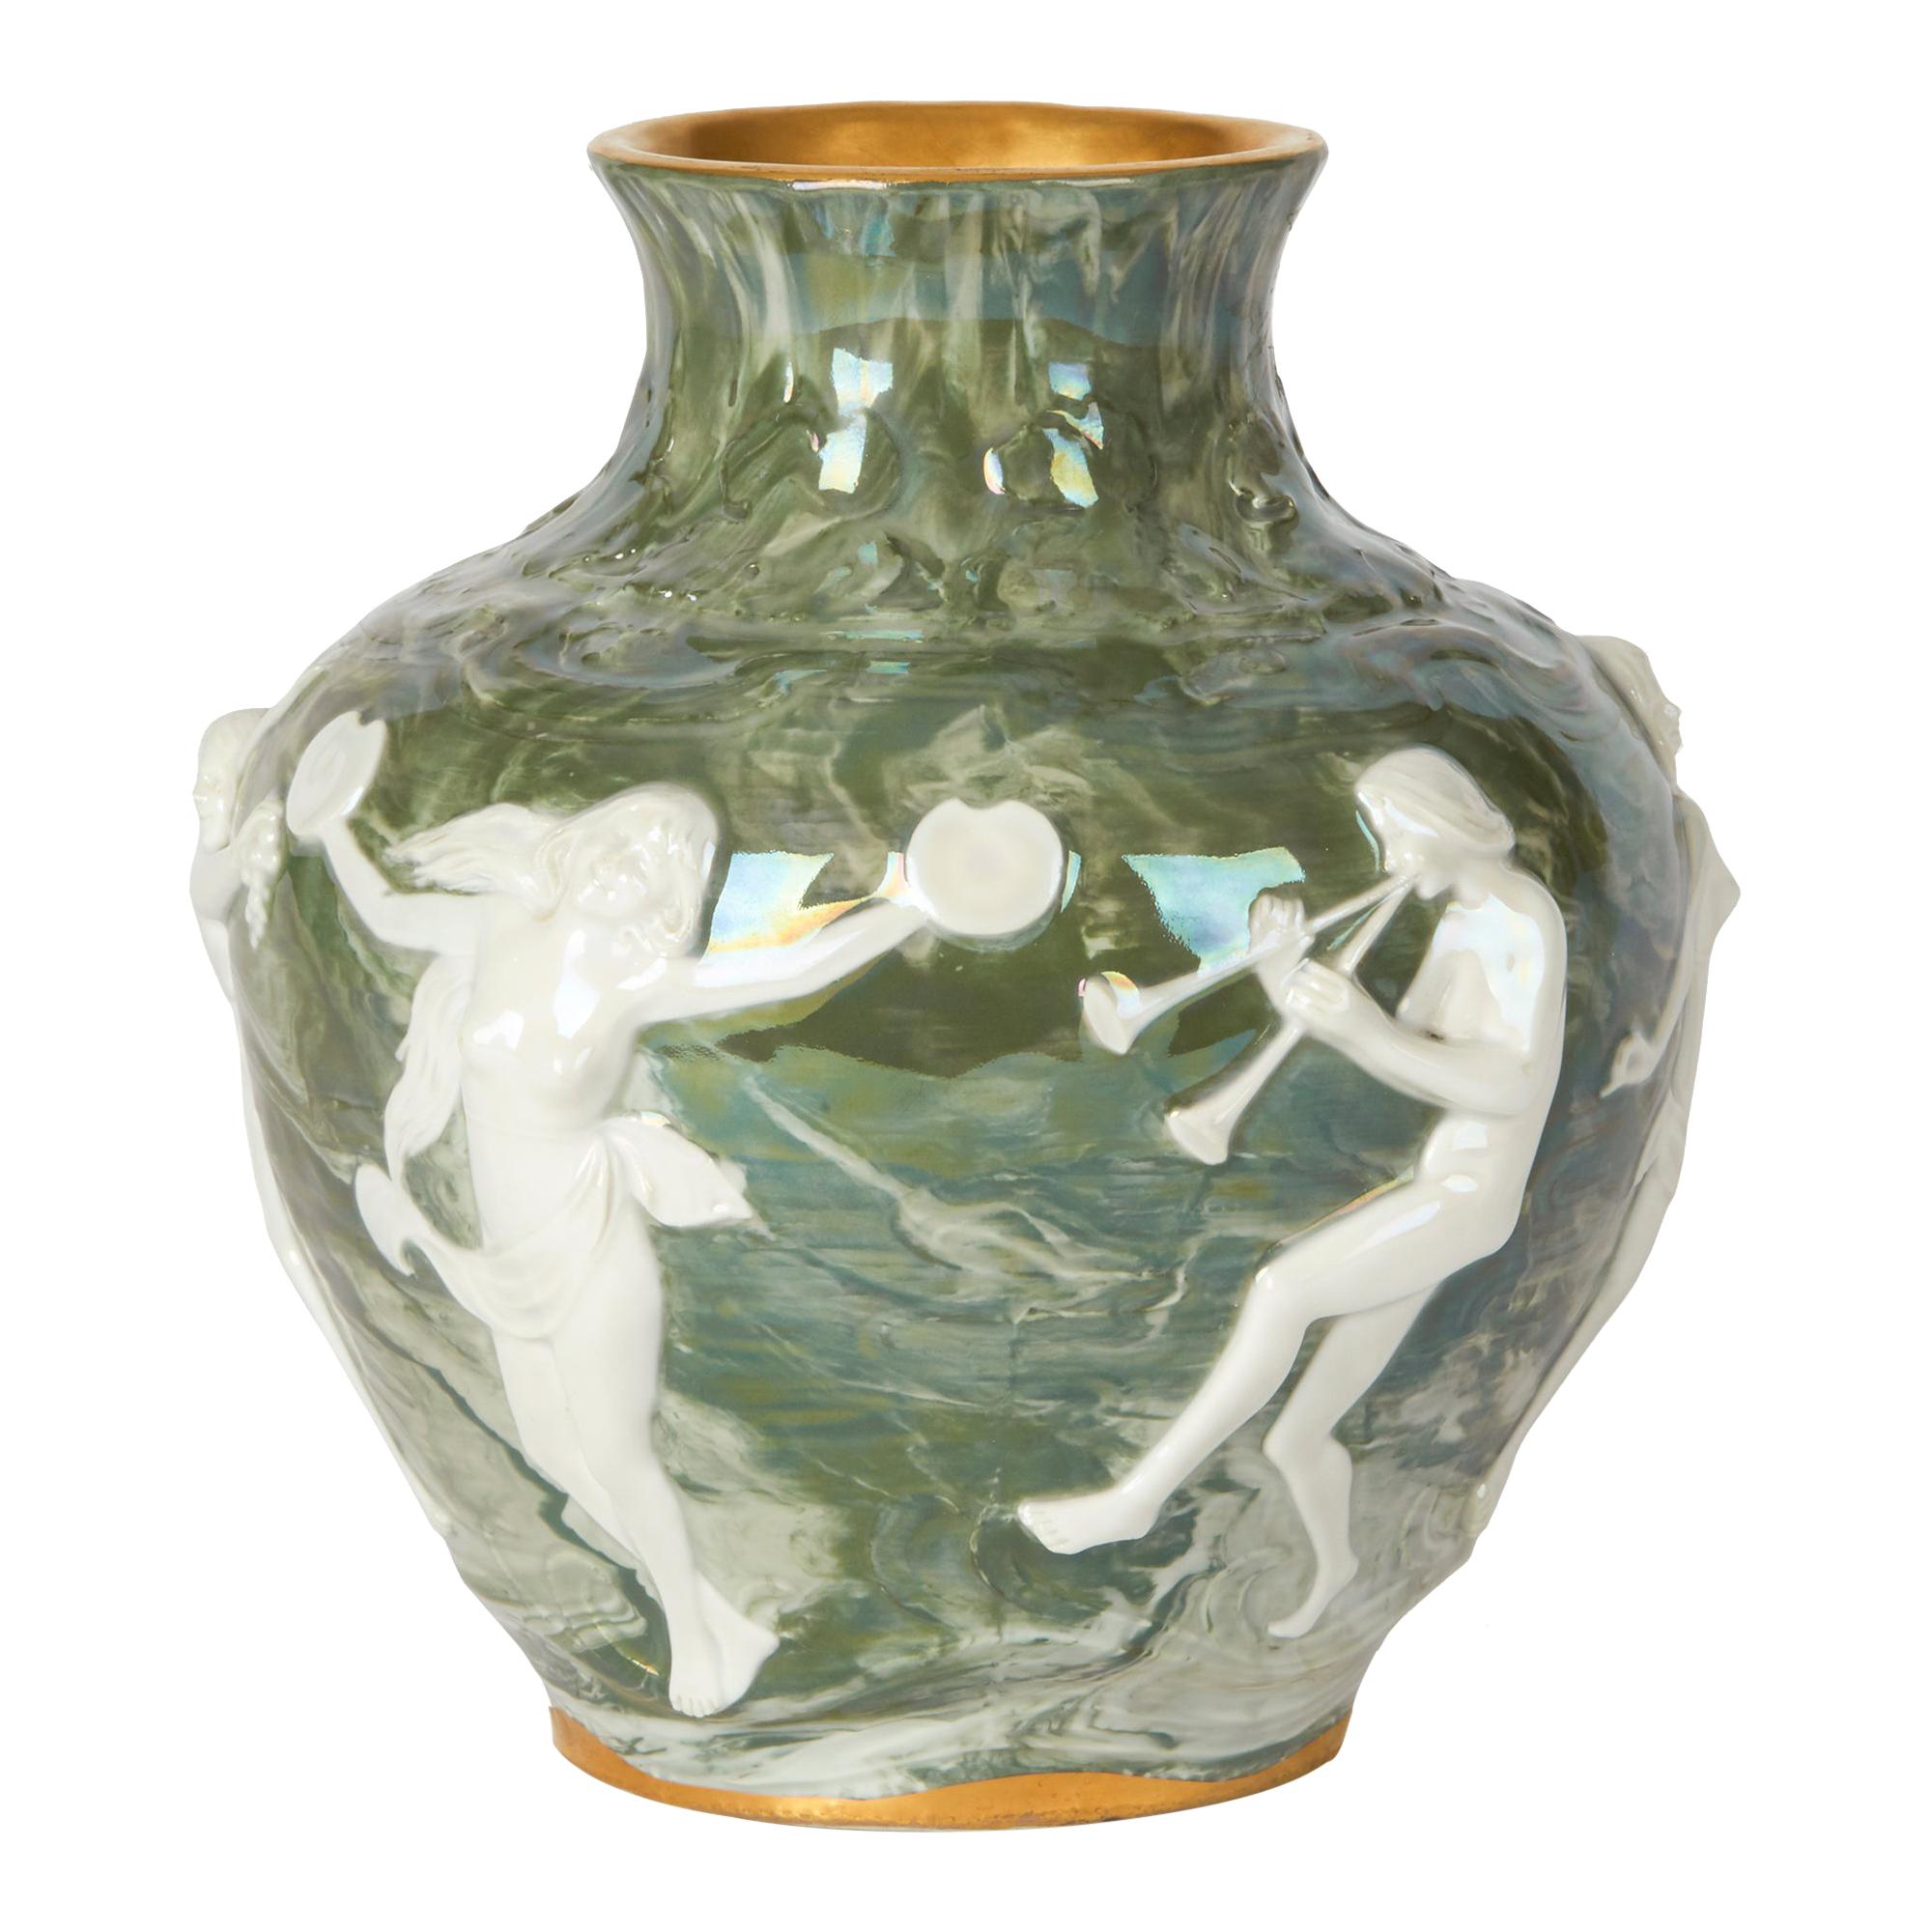 Adolph Oppel Kronach Art Nouveau Pottery Vase with Maidens, circa 1900